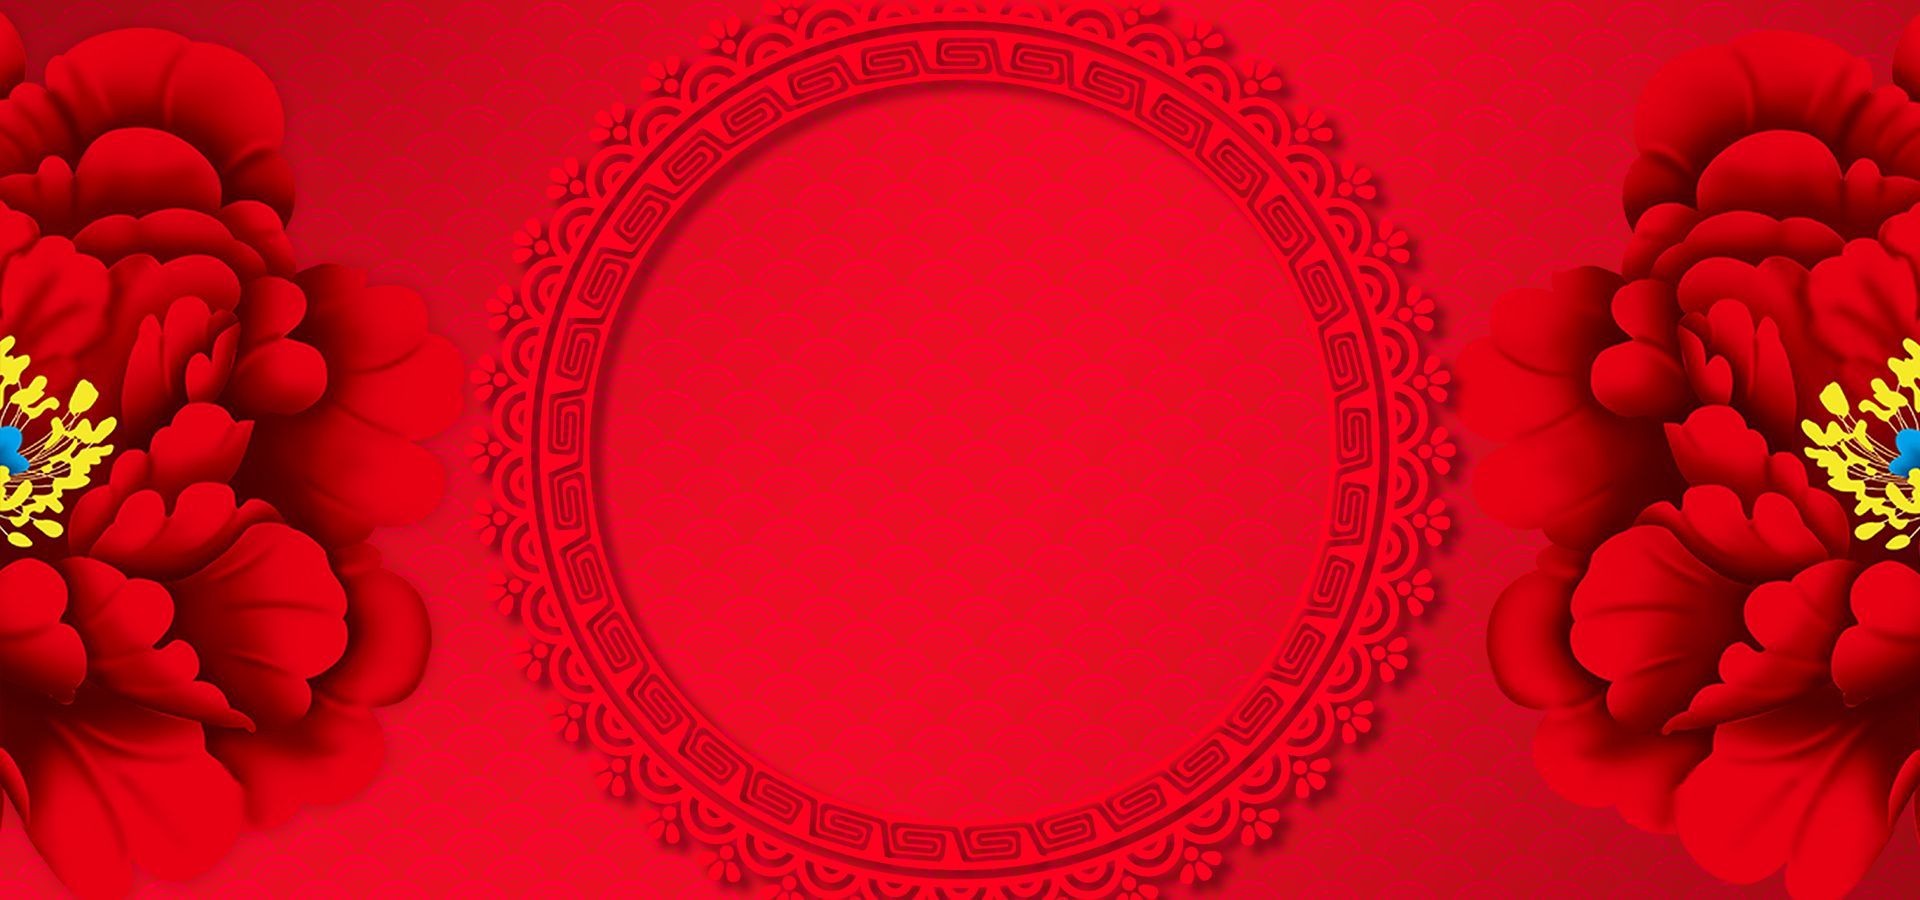 Chinese New Year Red Background. Chinese new year background, Red background, Red background image